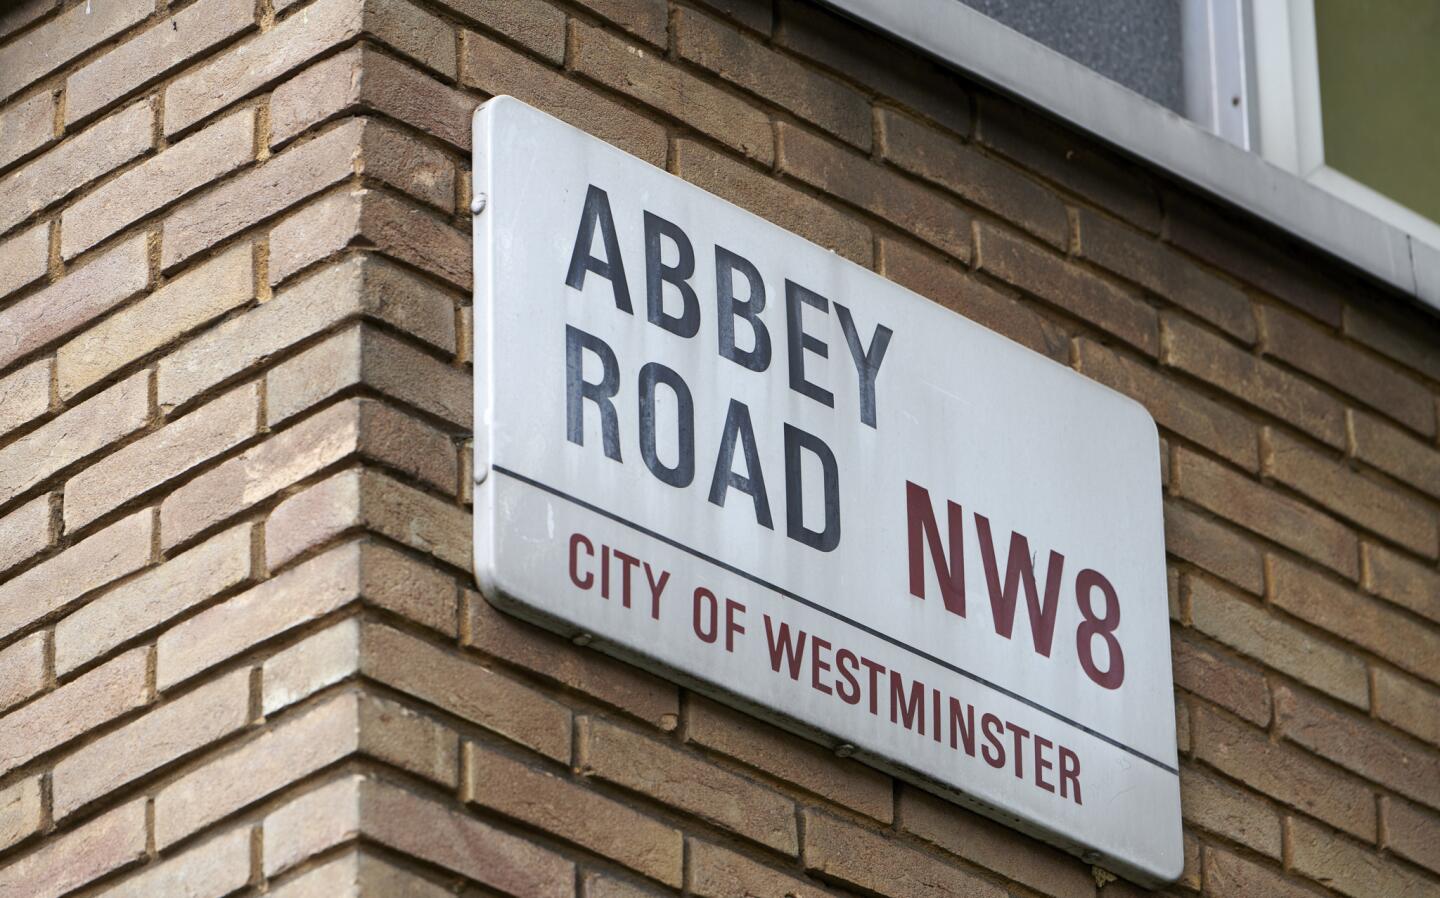 An Abbey Road sign in the city of westminster on July 19, 2018, United Kingdom.